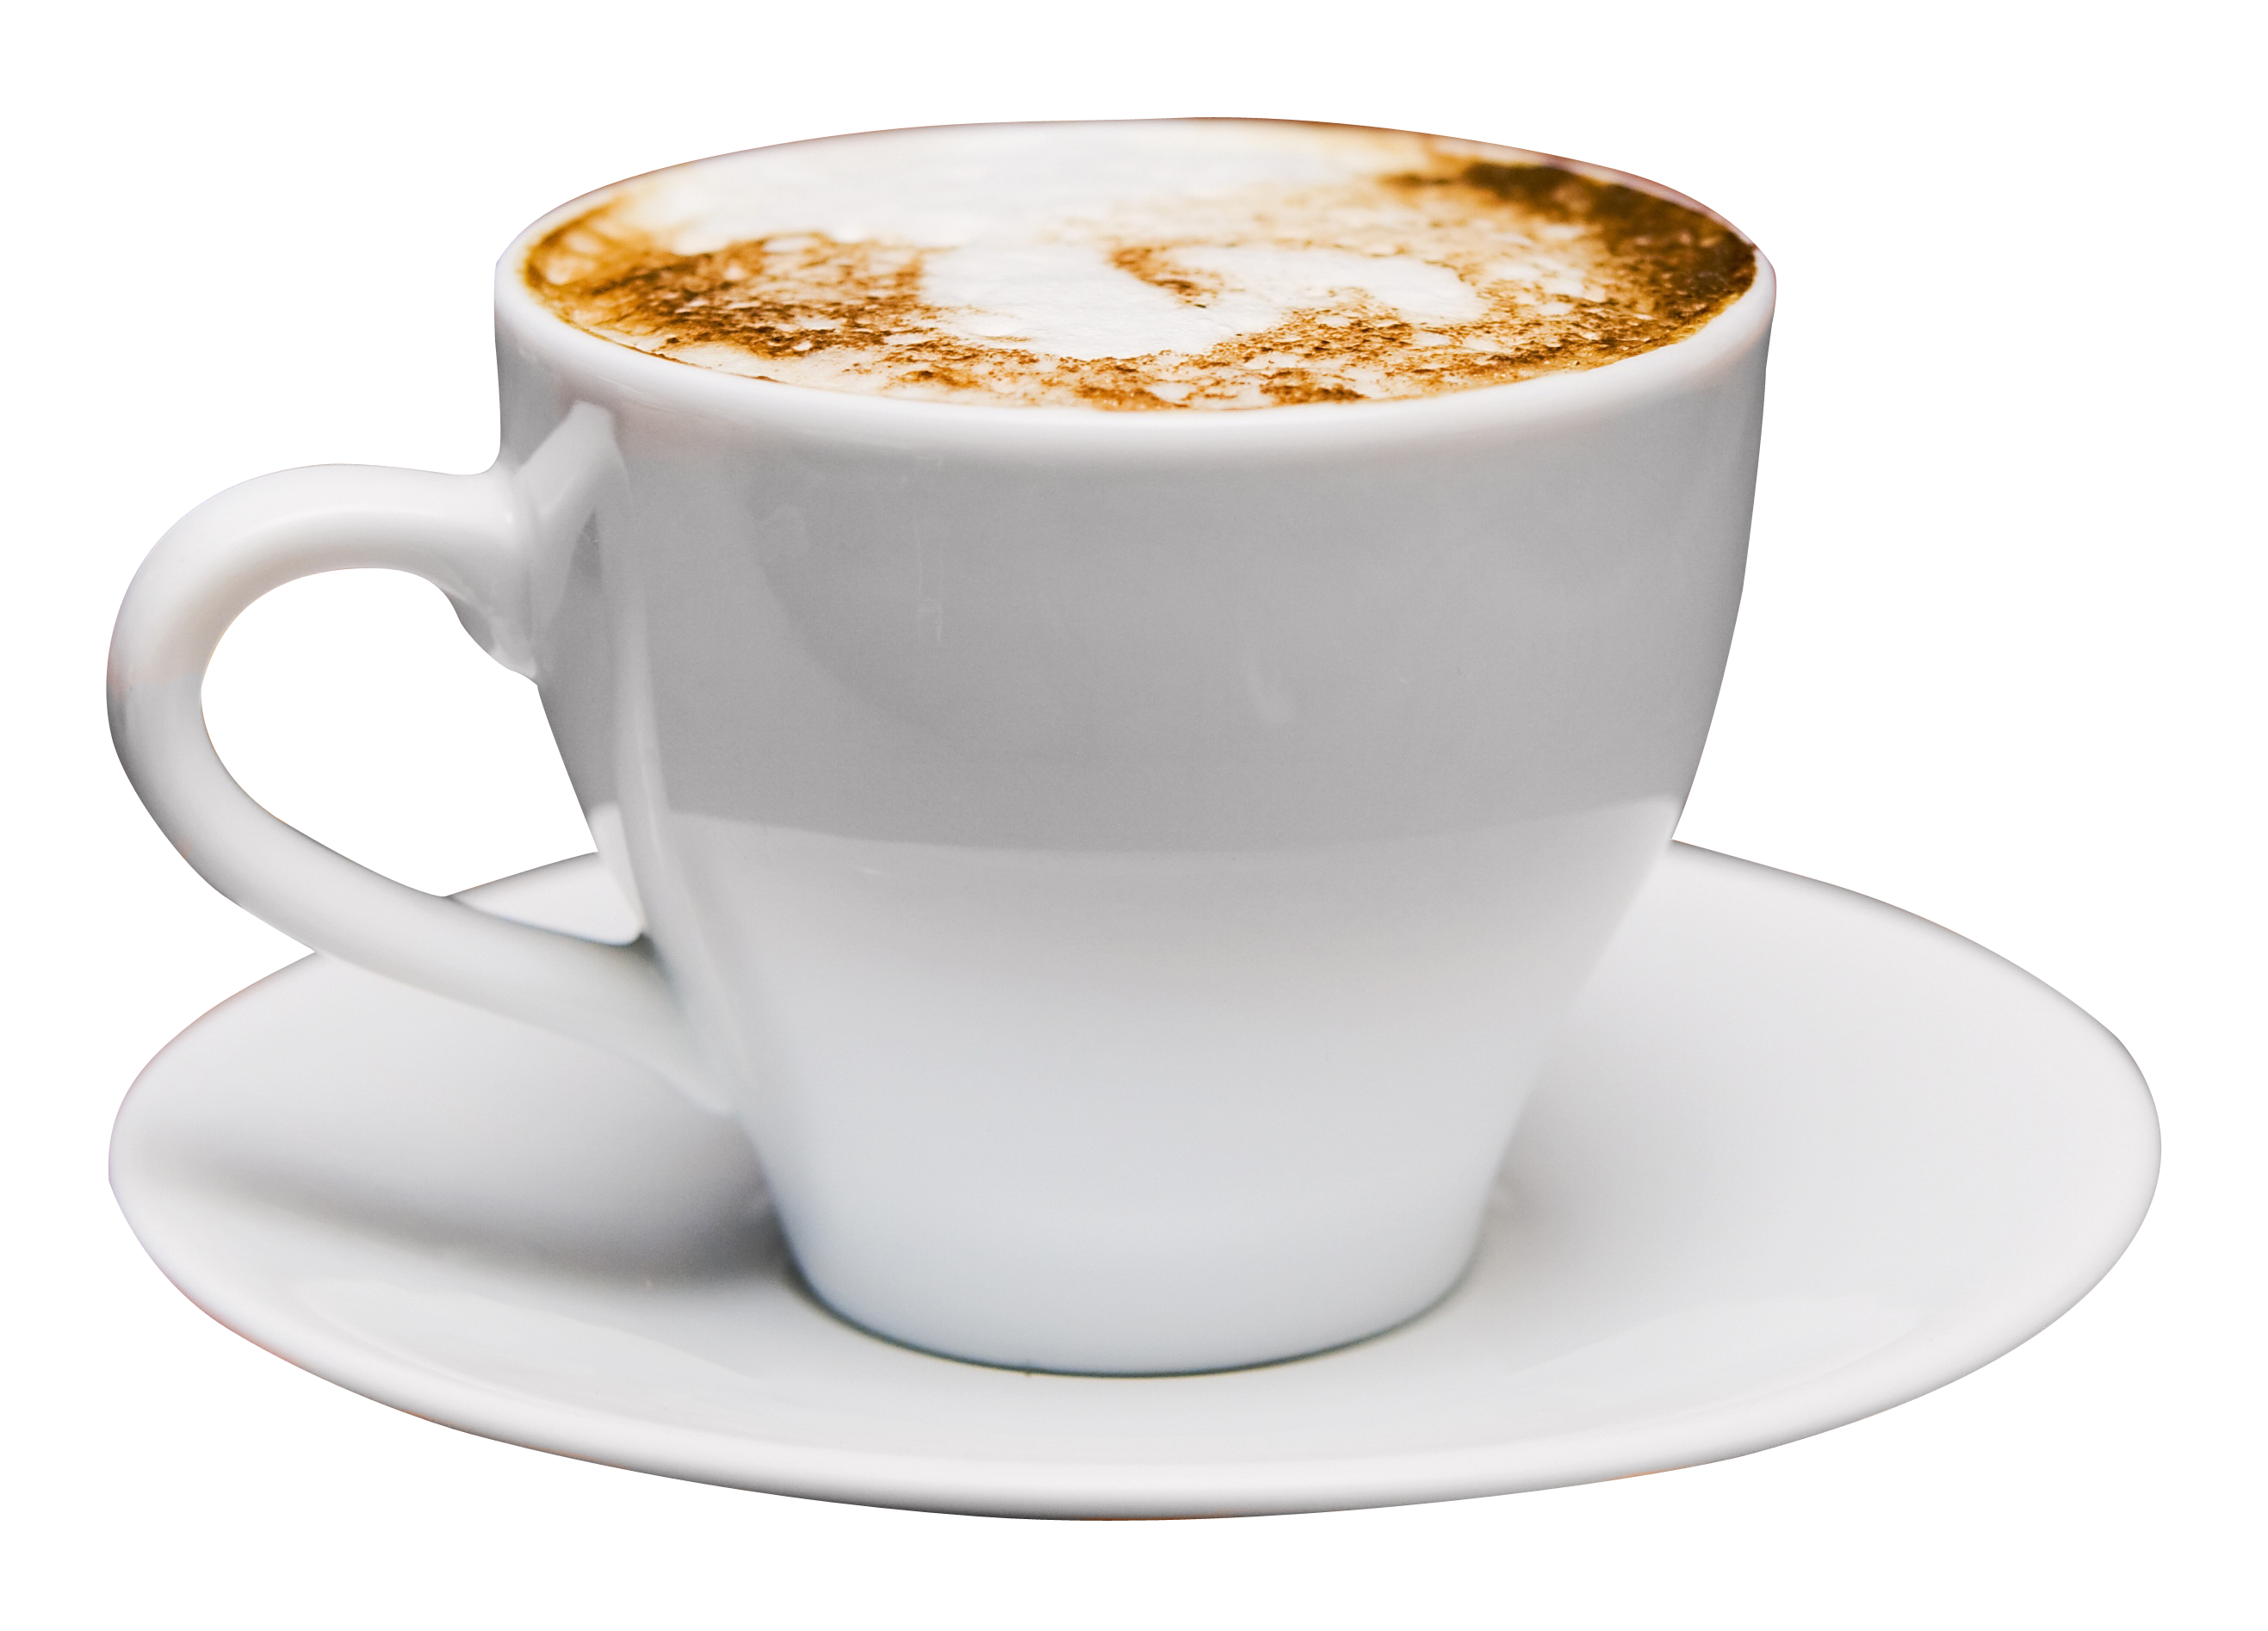 Coffee png images. Cup image purepng free